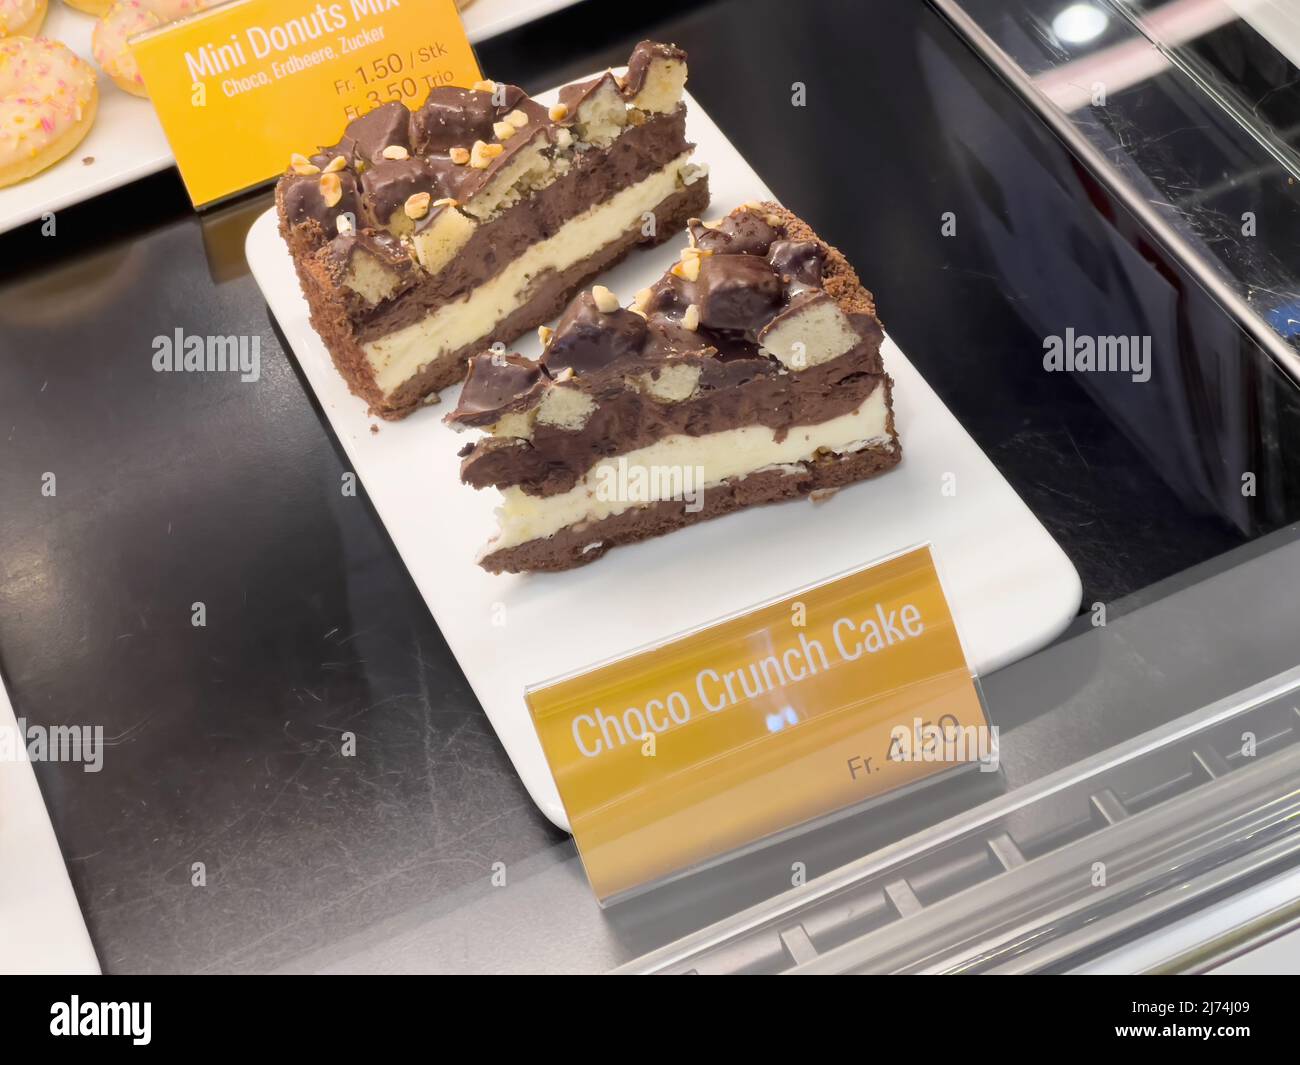 Basel, Switzerland - Dec 20, 2021: Close-up POV shot of delicious McDonalds Choco Crunch Cake with the high price of 4, 5 swiss francs Stock Photo